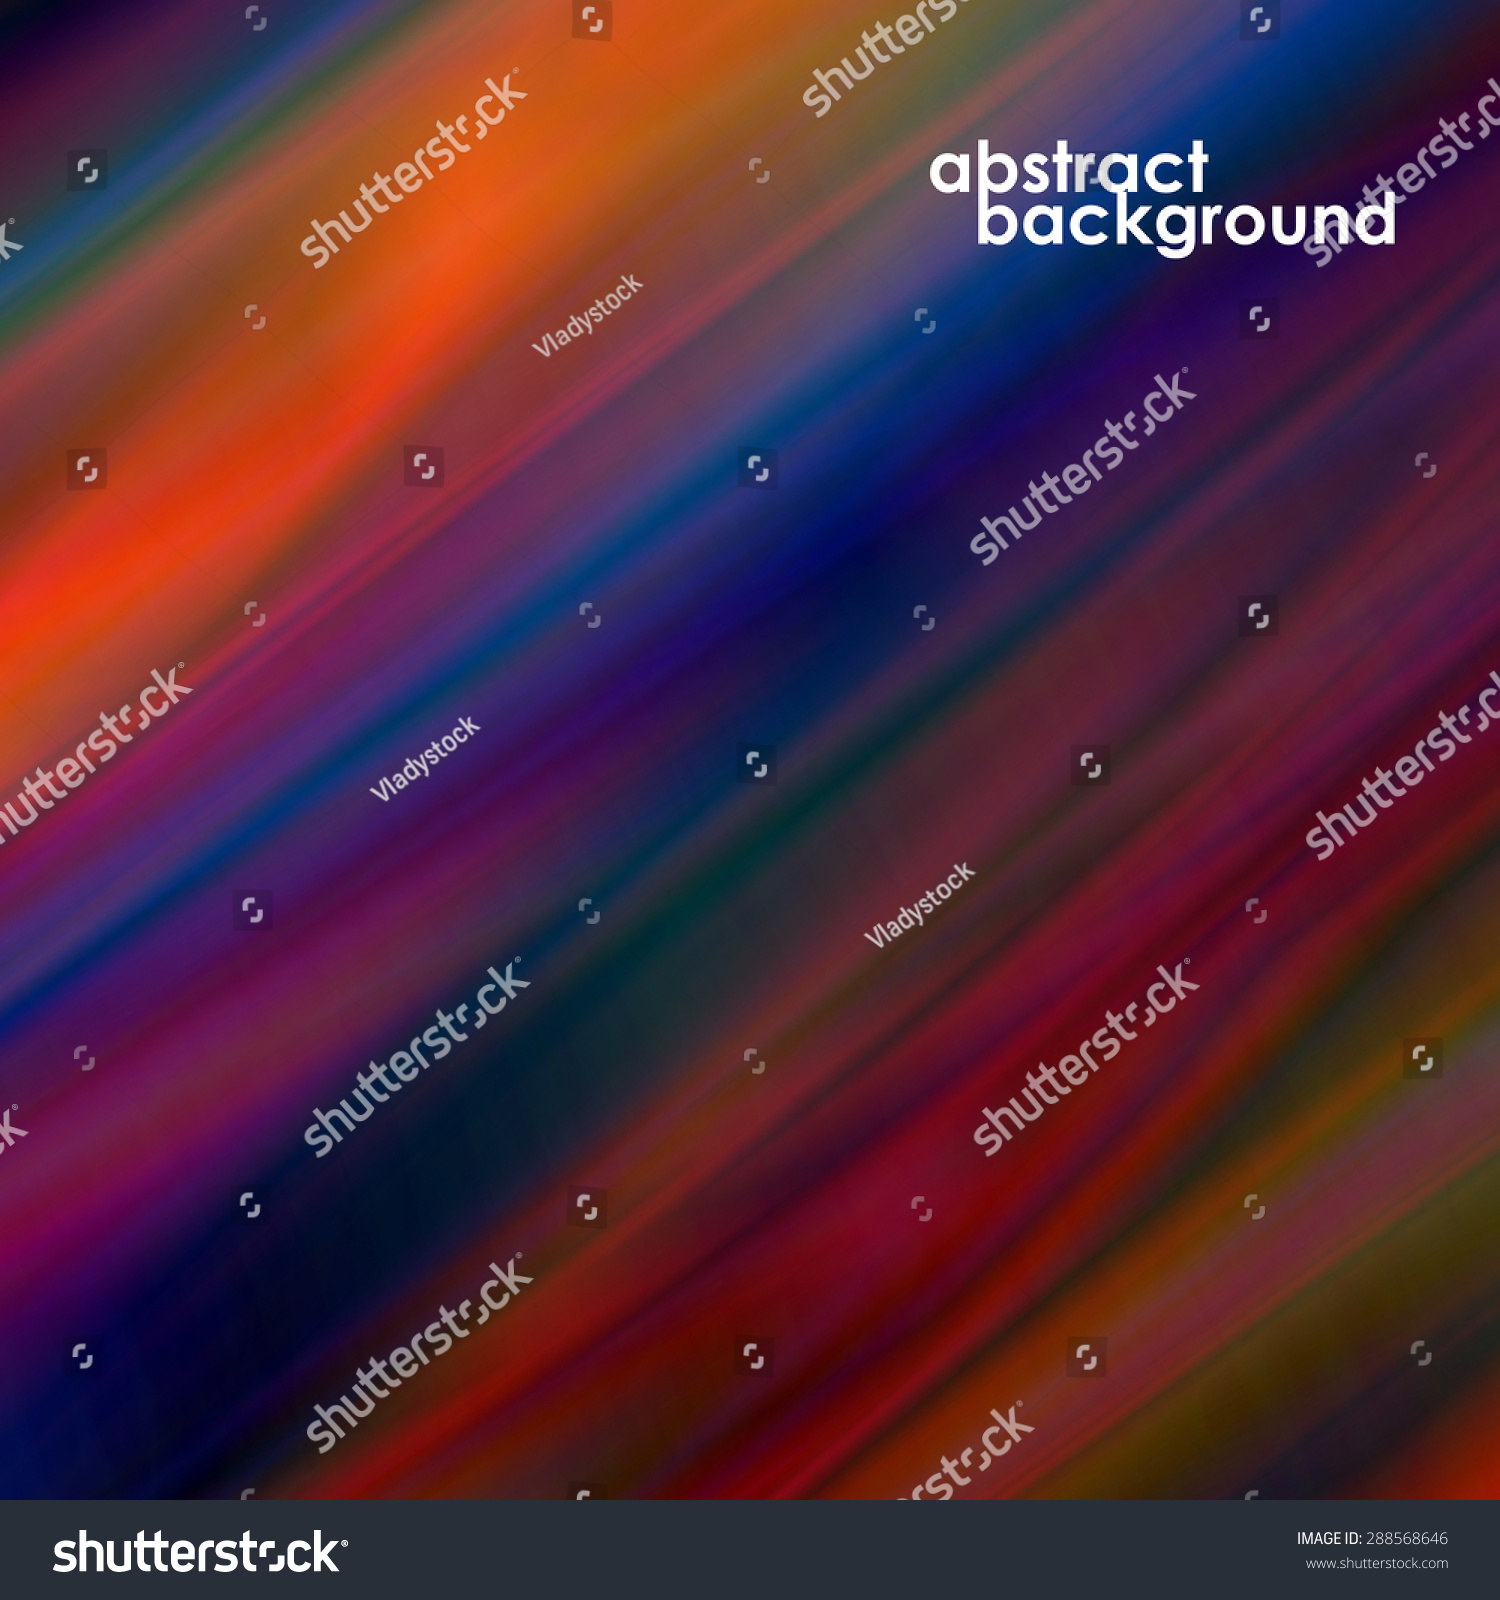 Edit Vectors Free Online - Abstract background, | Shutterstock Editor